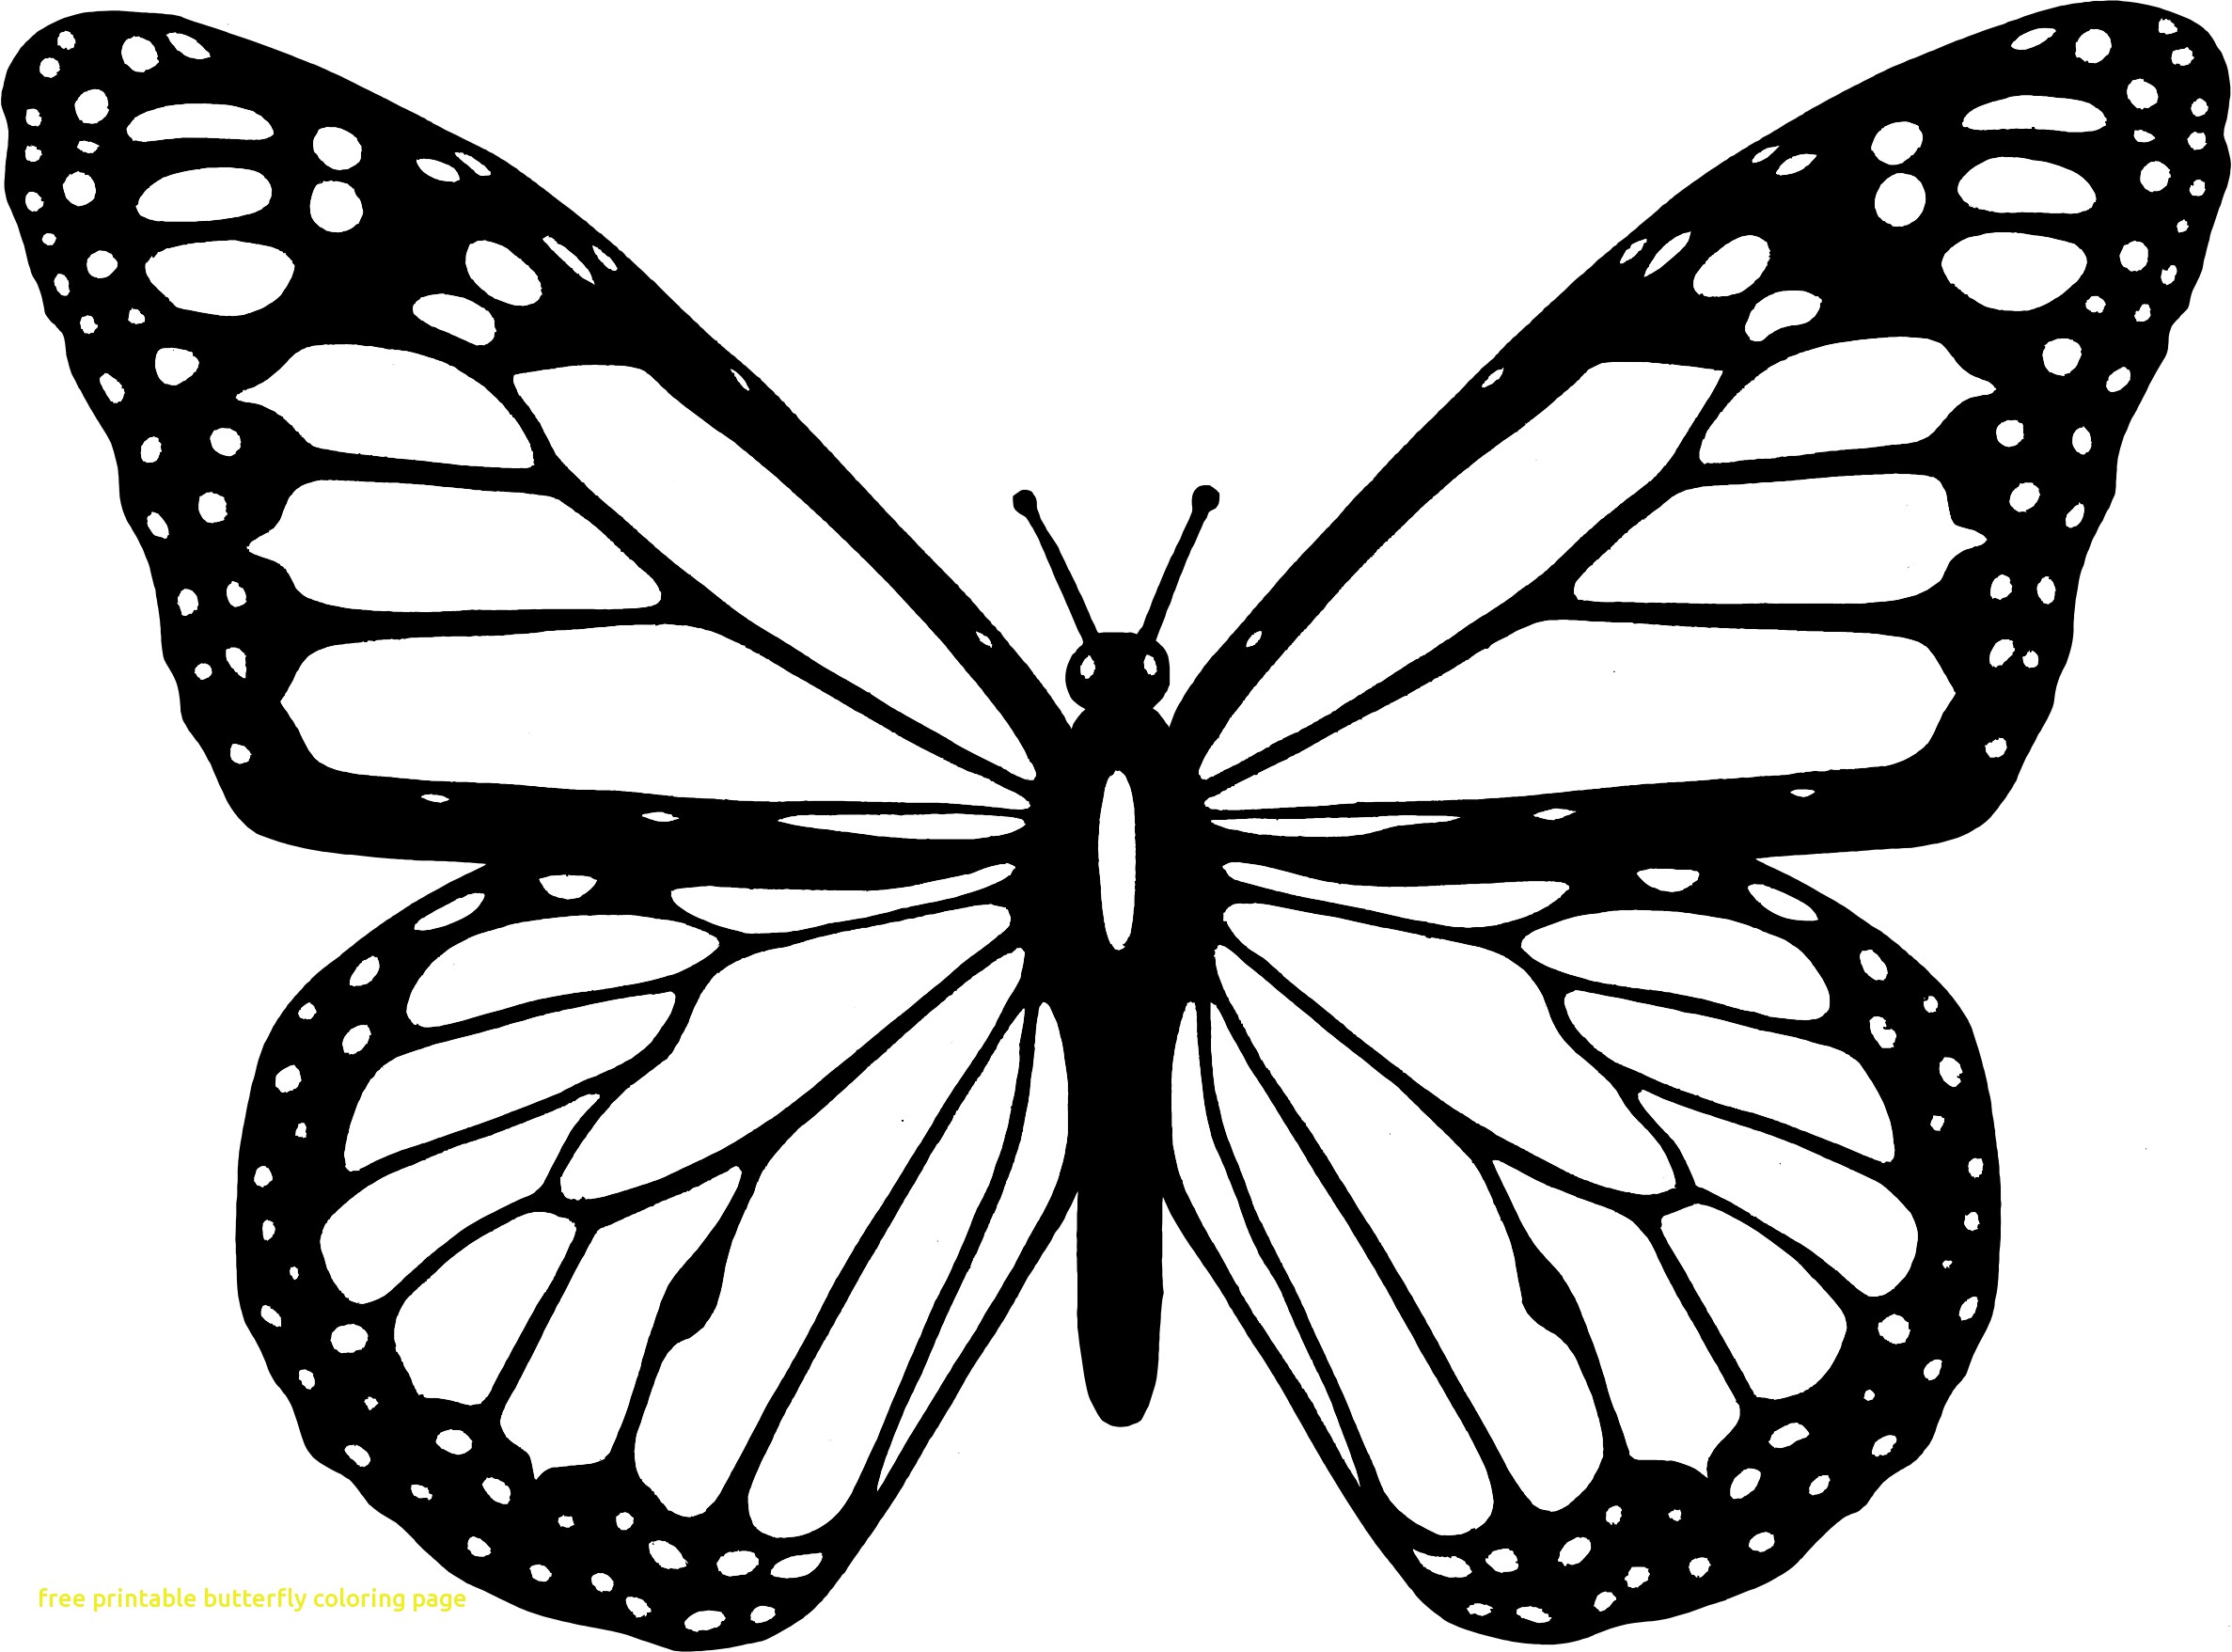 New Colouring Pages Of Butterfly Easily Colori #21586 - Unknown ...